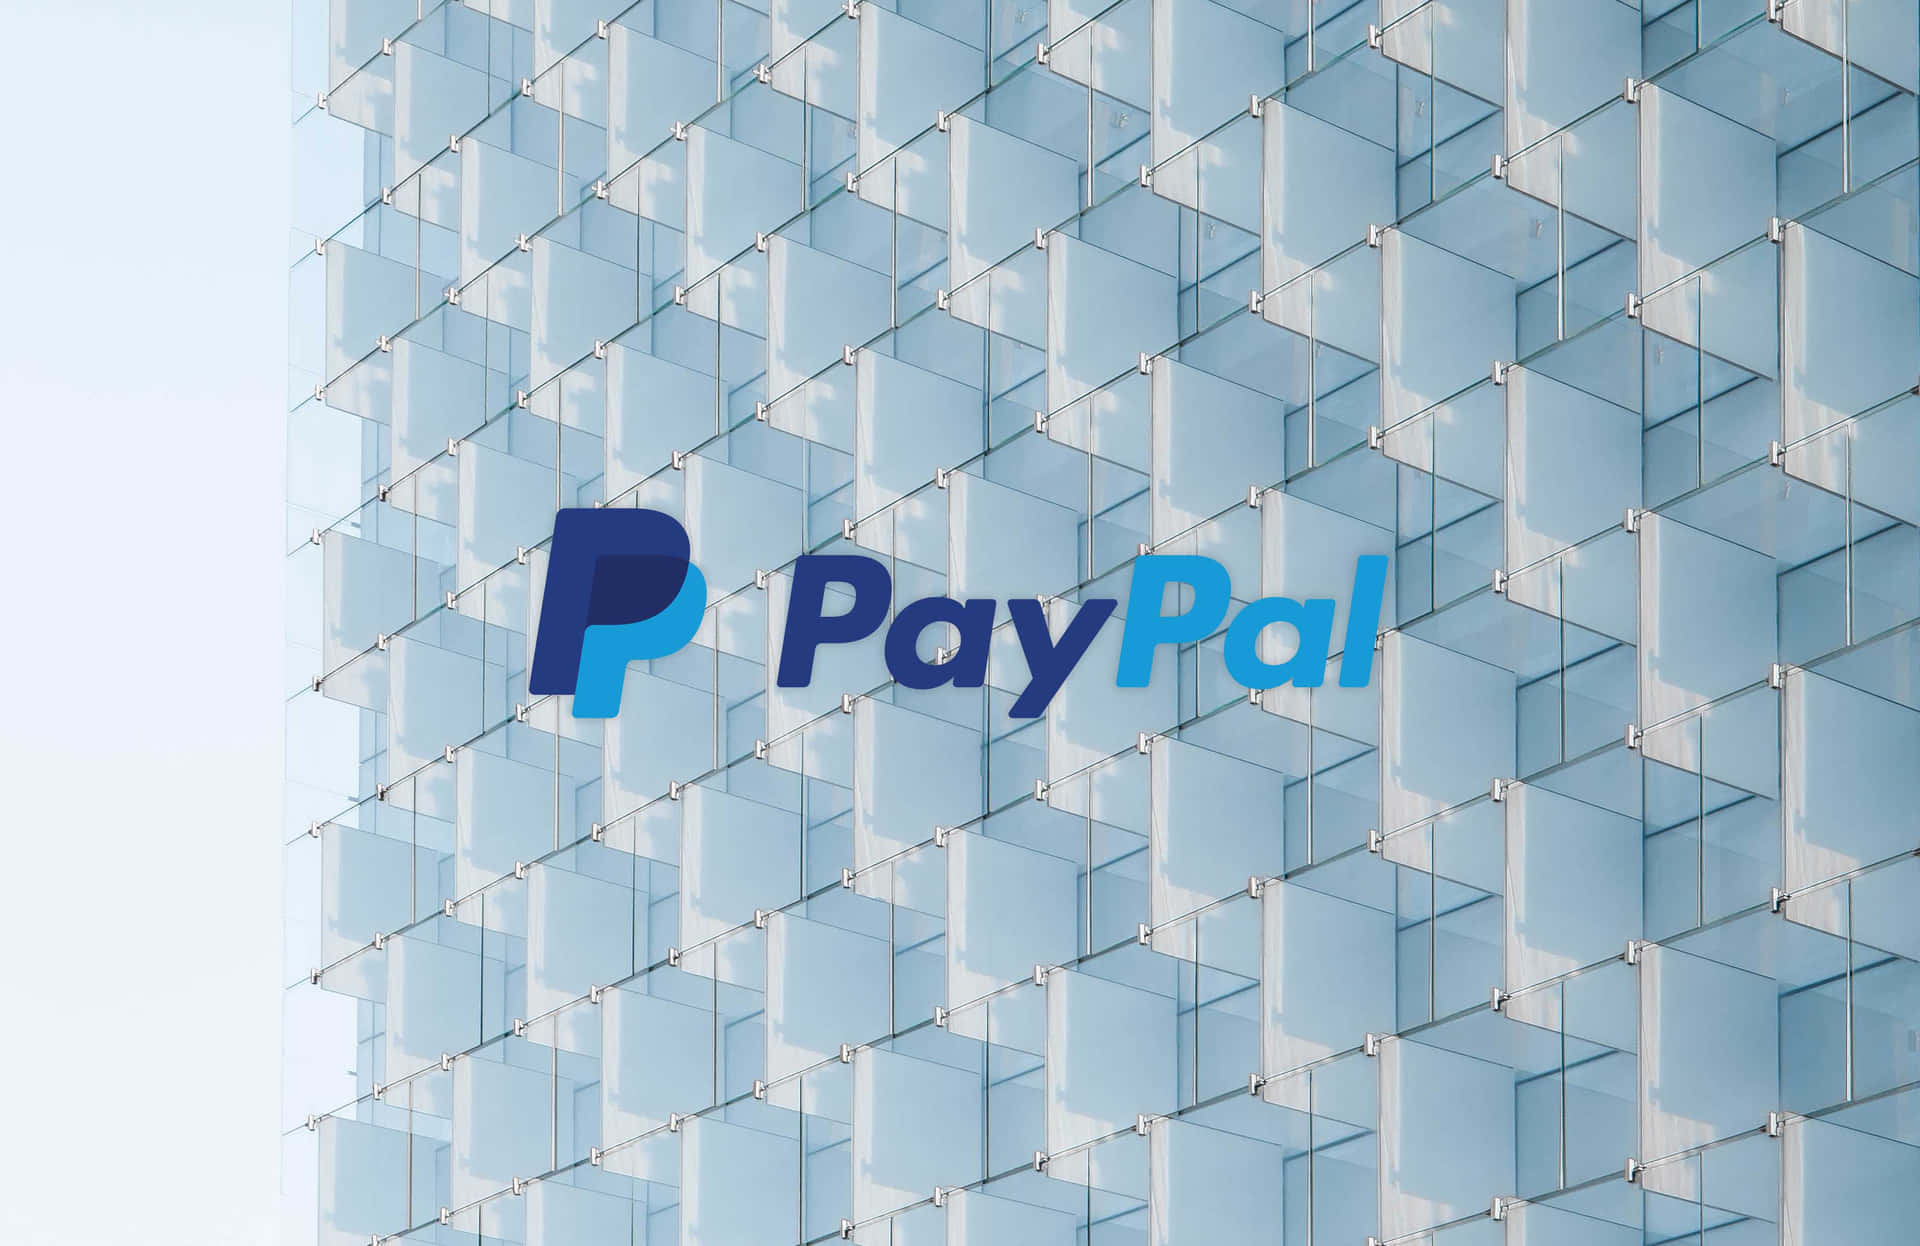 Paypal Logo On A Building